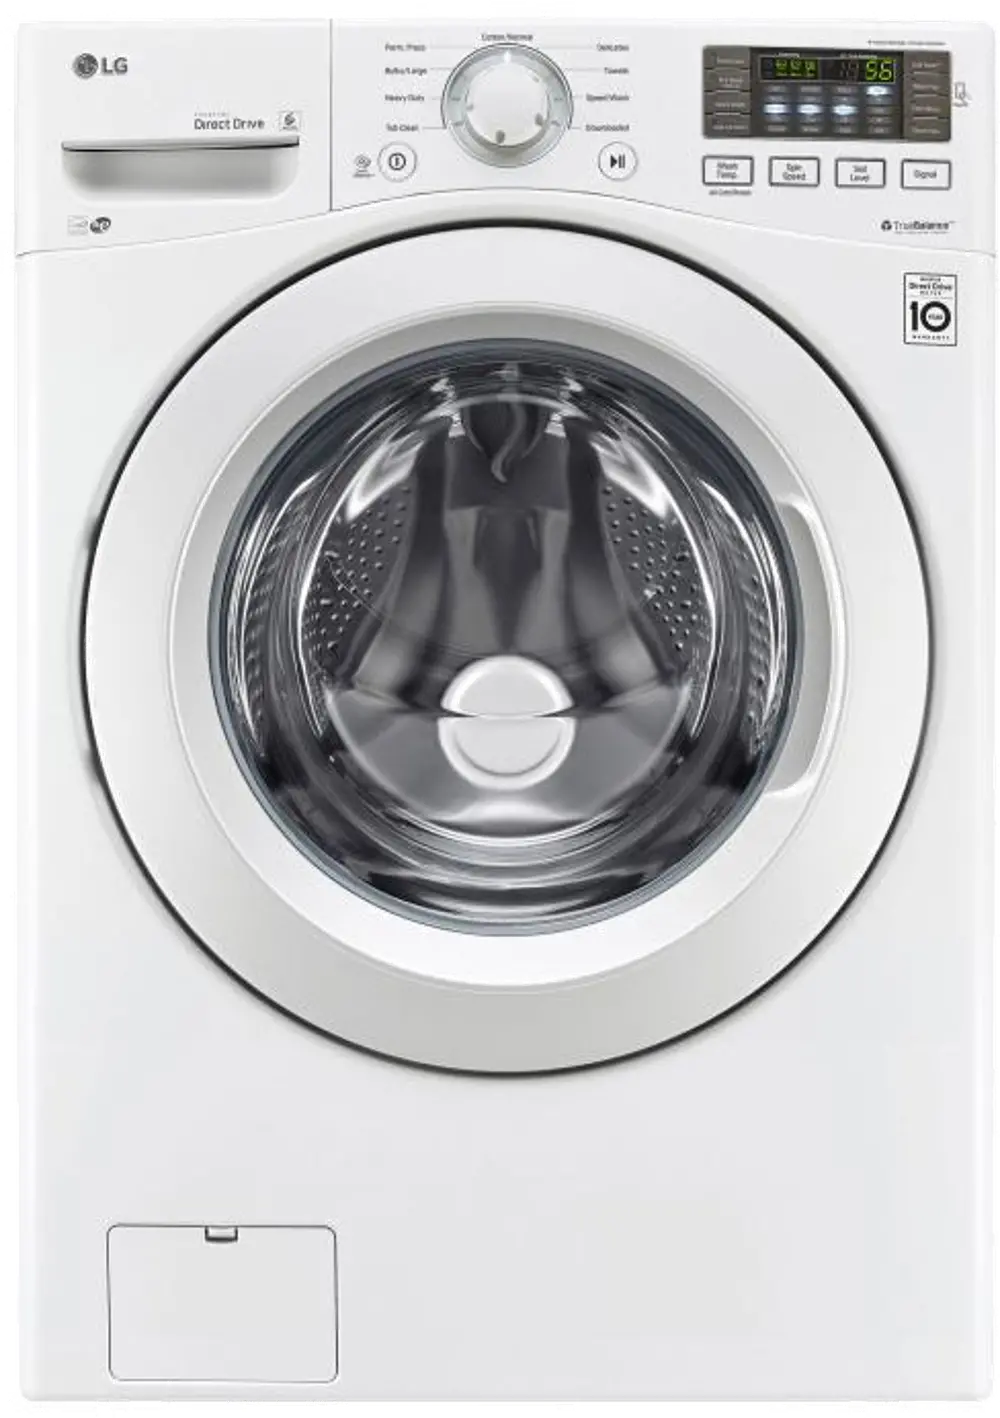 WM3080CW LG 4.3 cu. ft. Front Washer - White-1